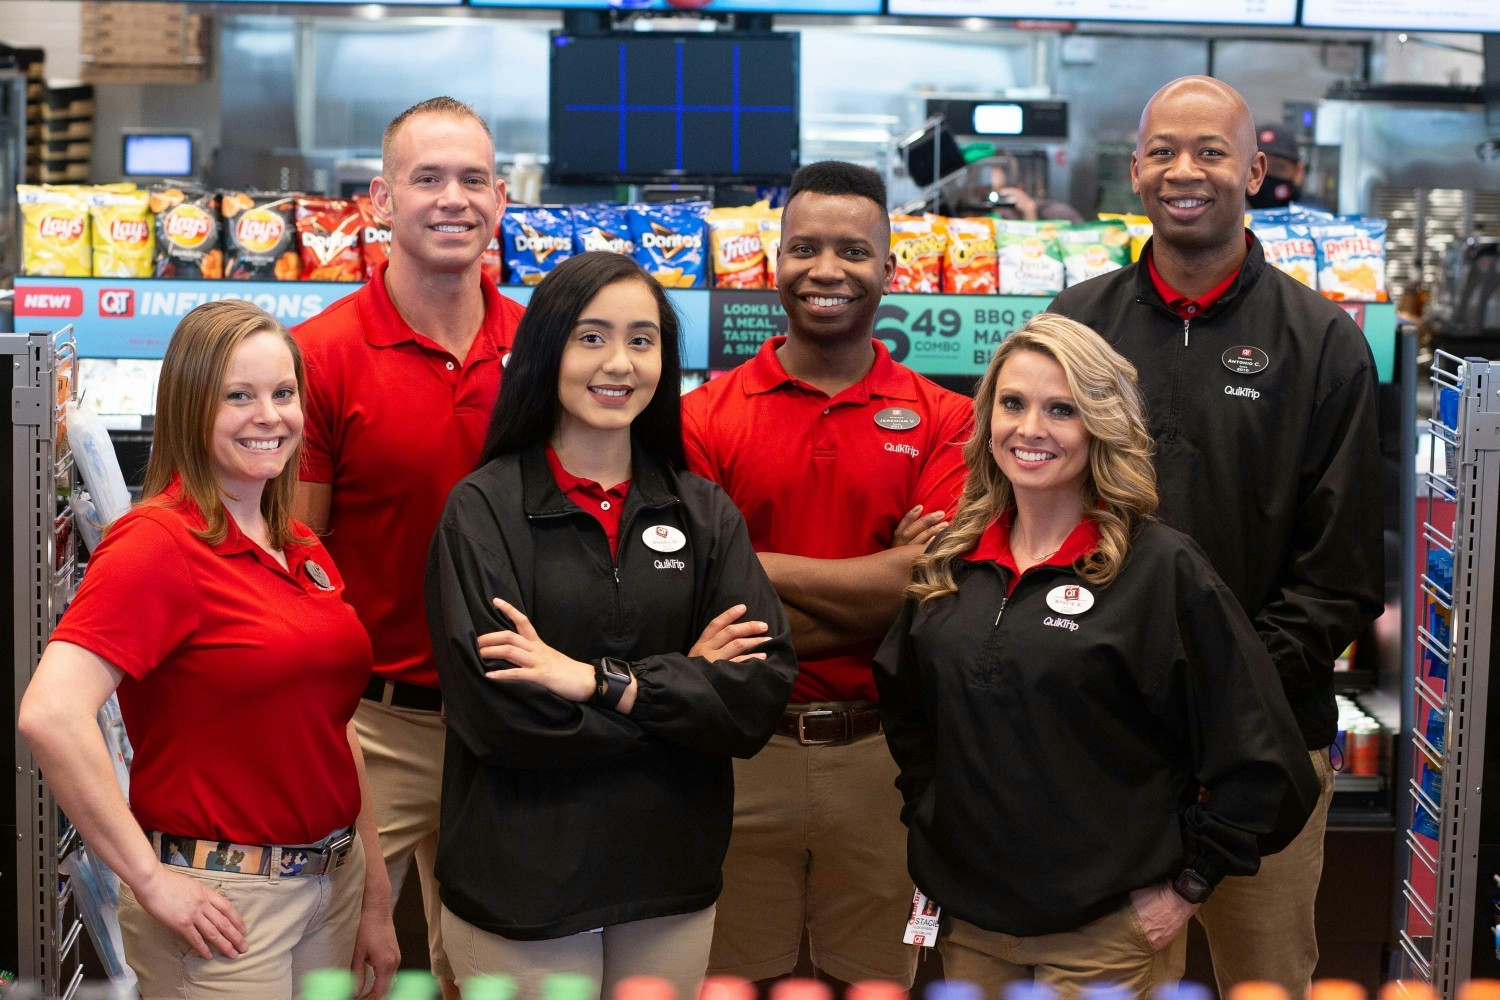 QuikTrip's culture is like no other!